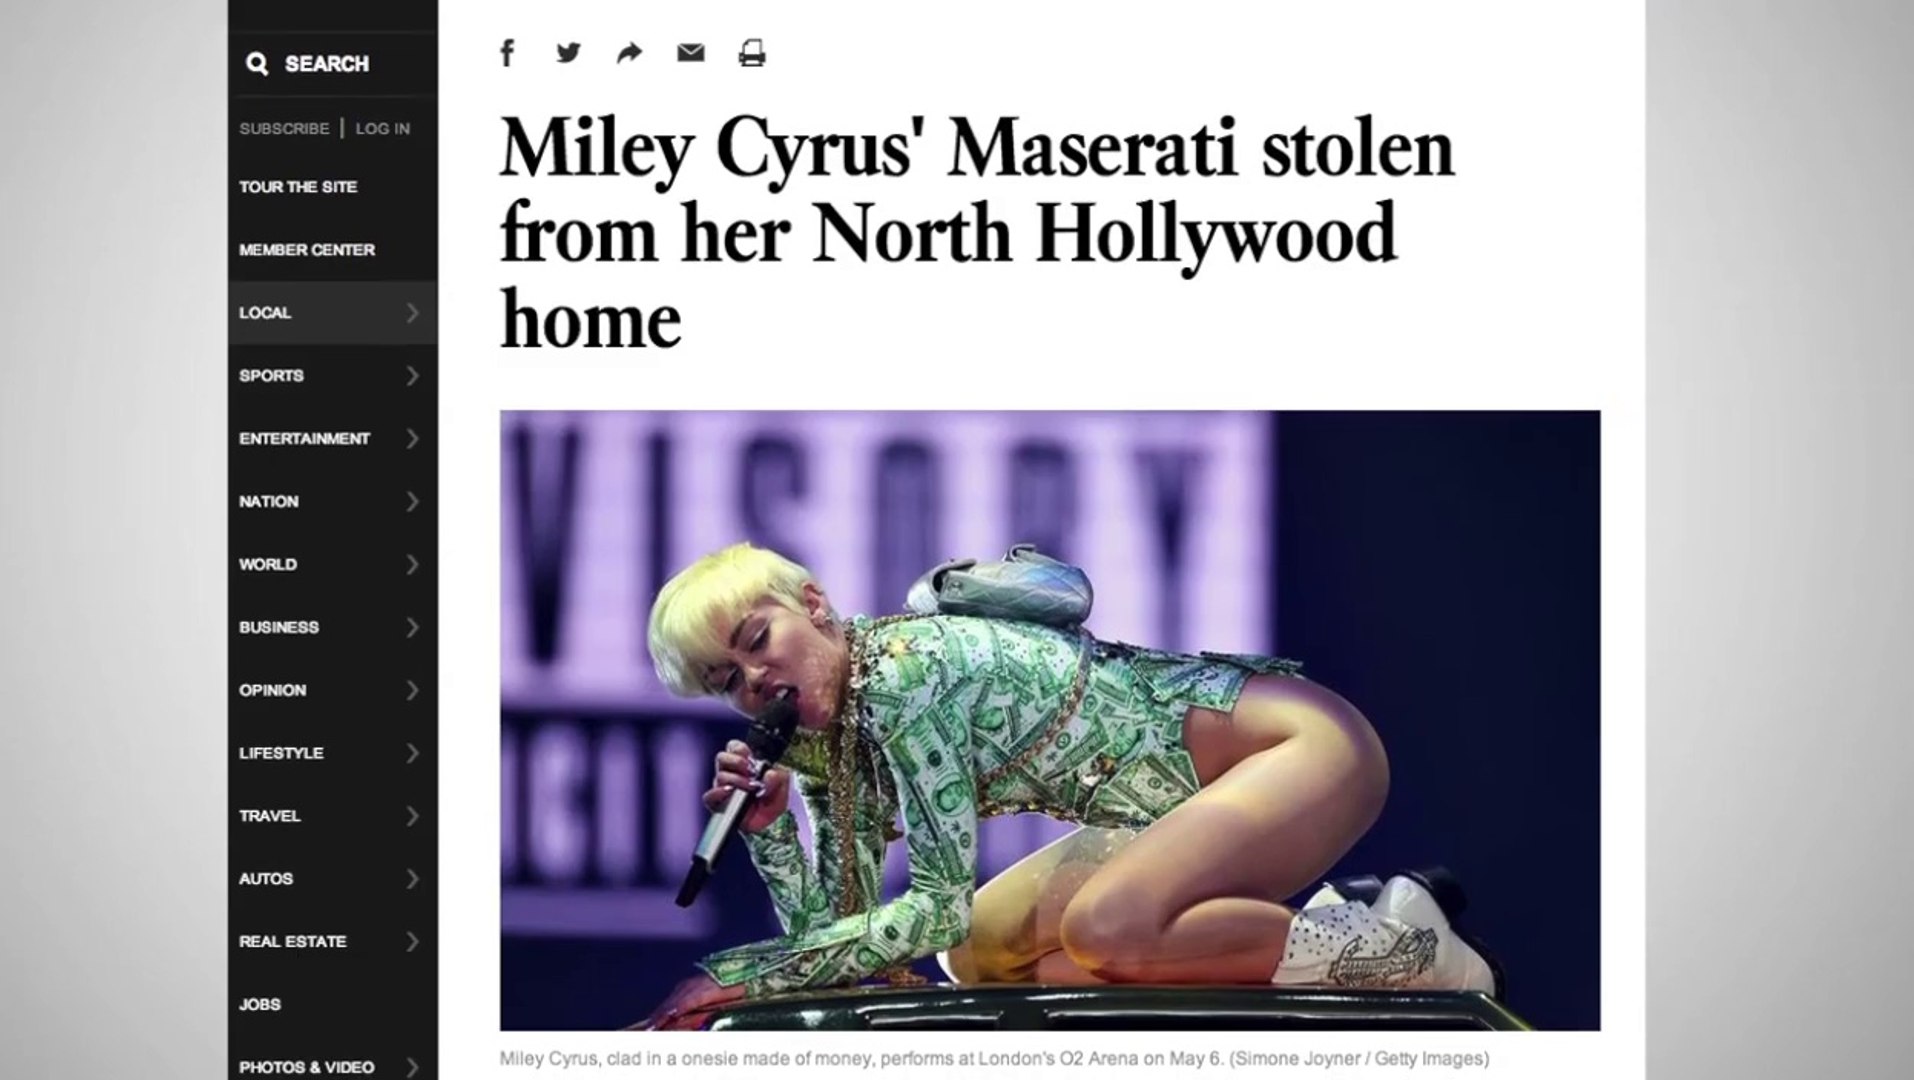 Miley Cyrus' Maserati Stolen From Her Home